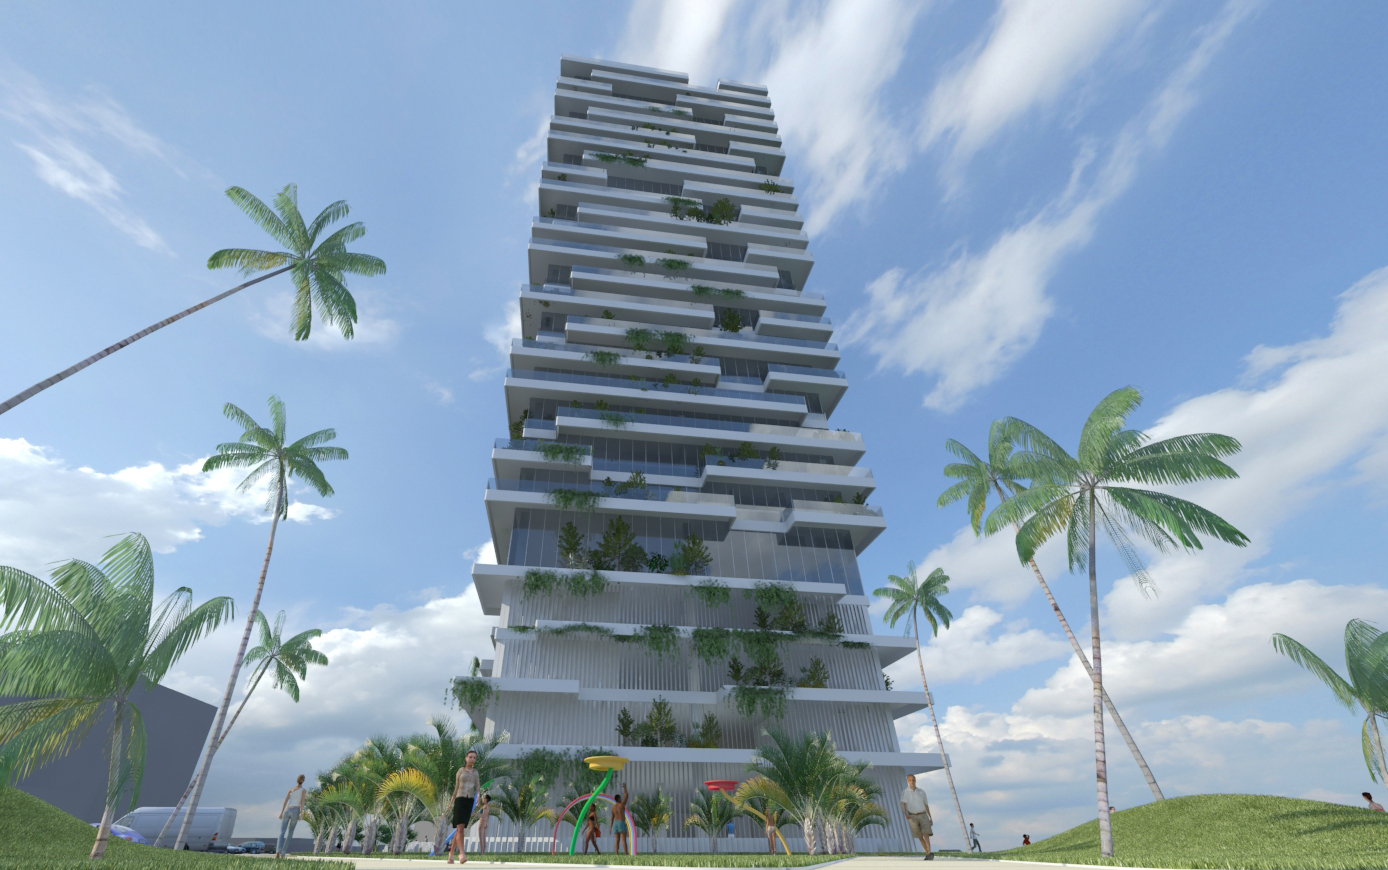 Rendering of the proposed tower